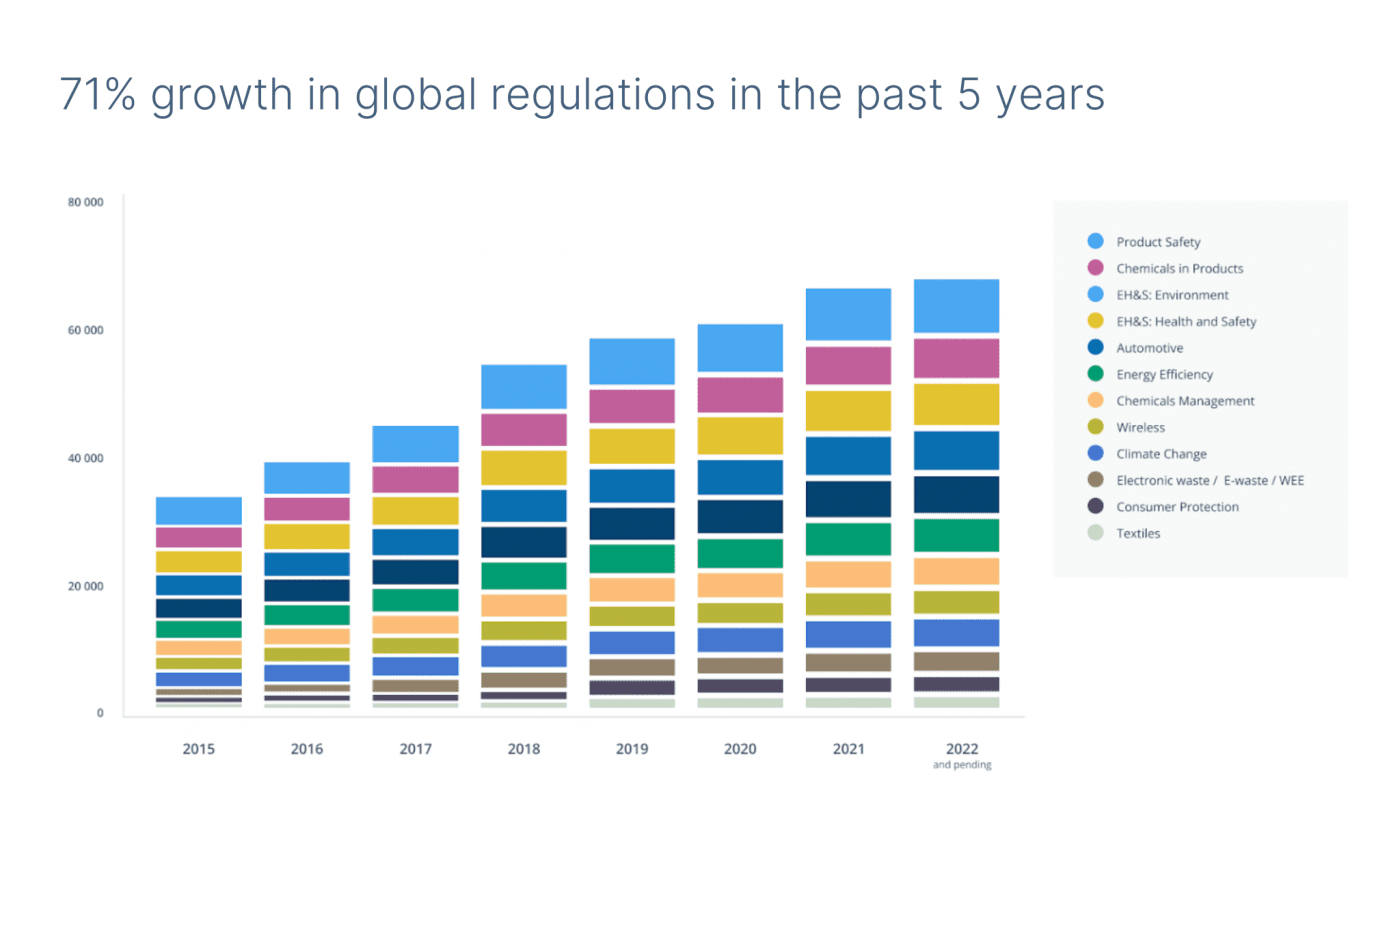 In the past 5 years alone, there has been a 71% growth in Product Compliance global regulations